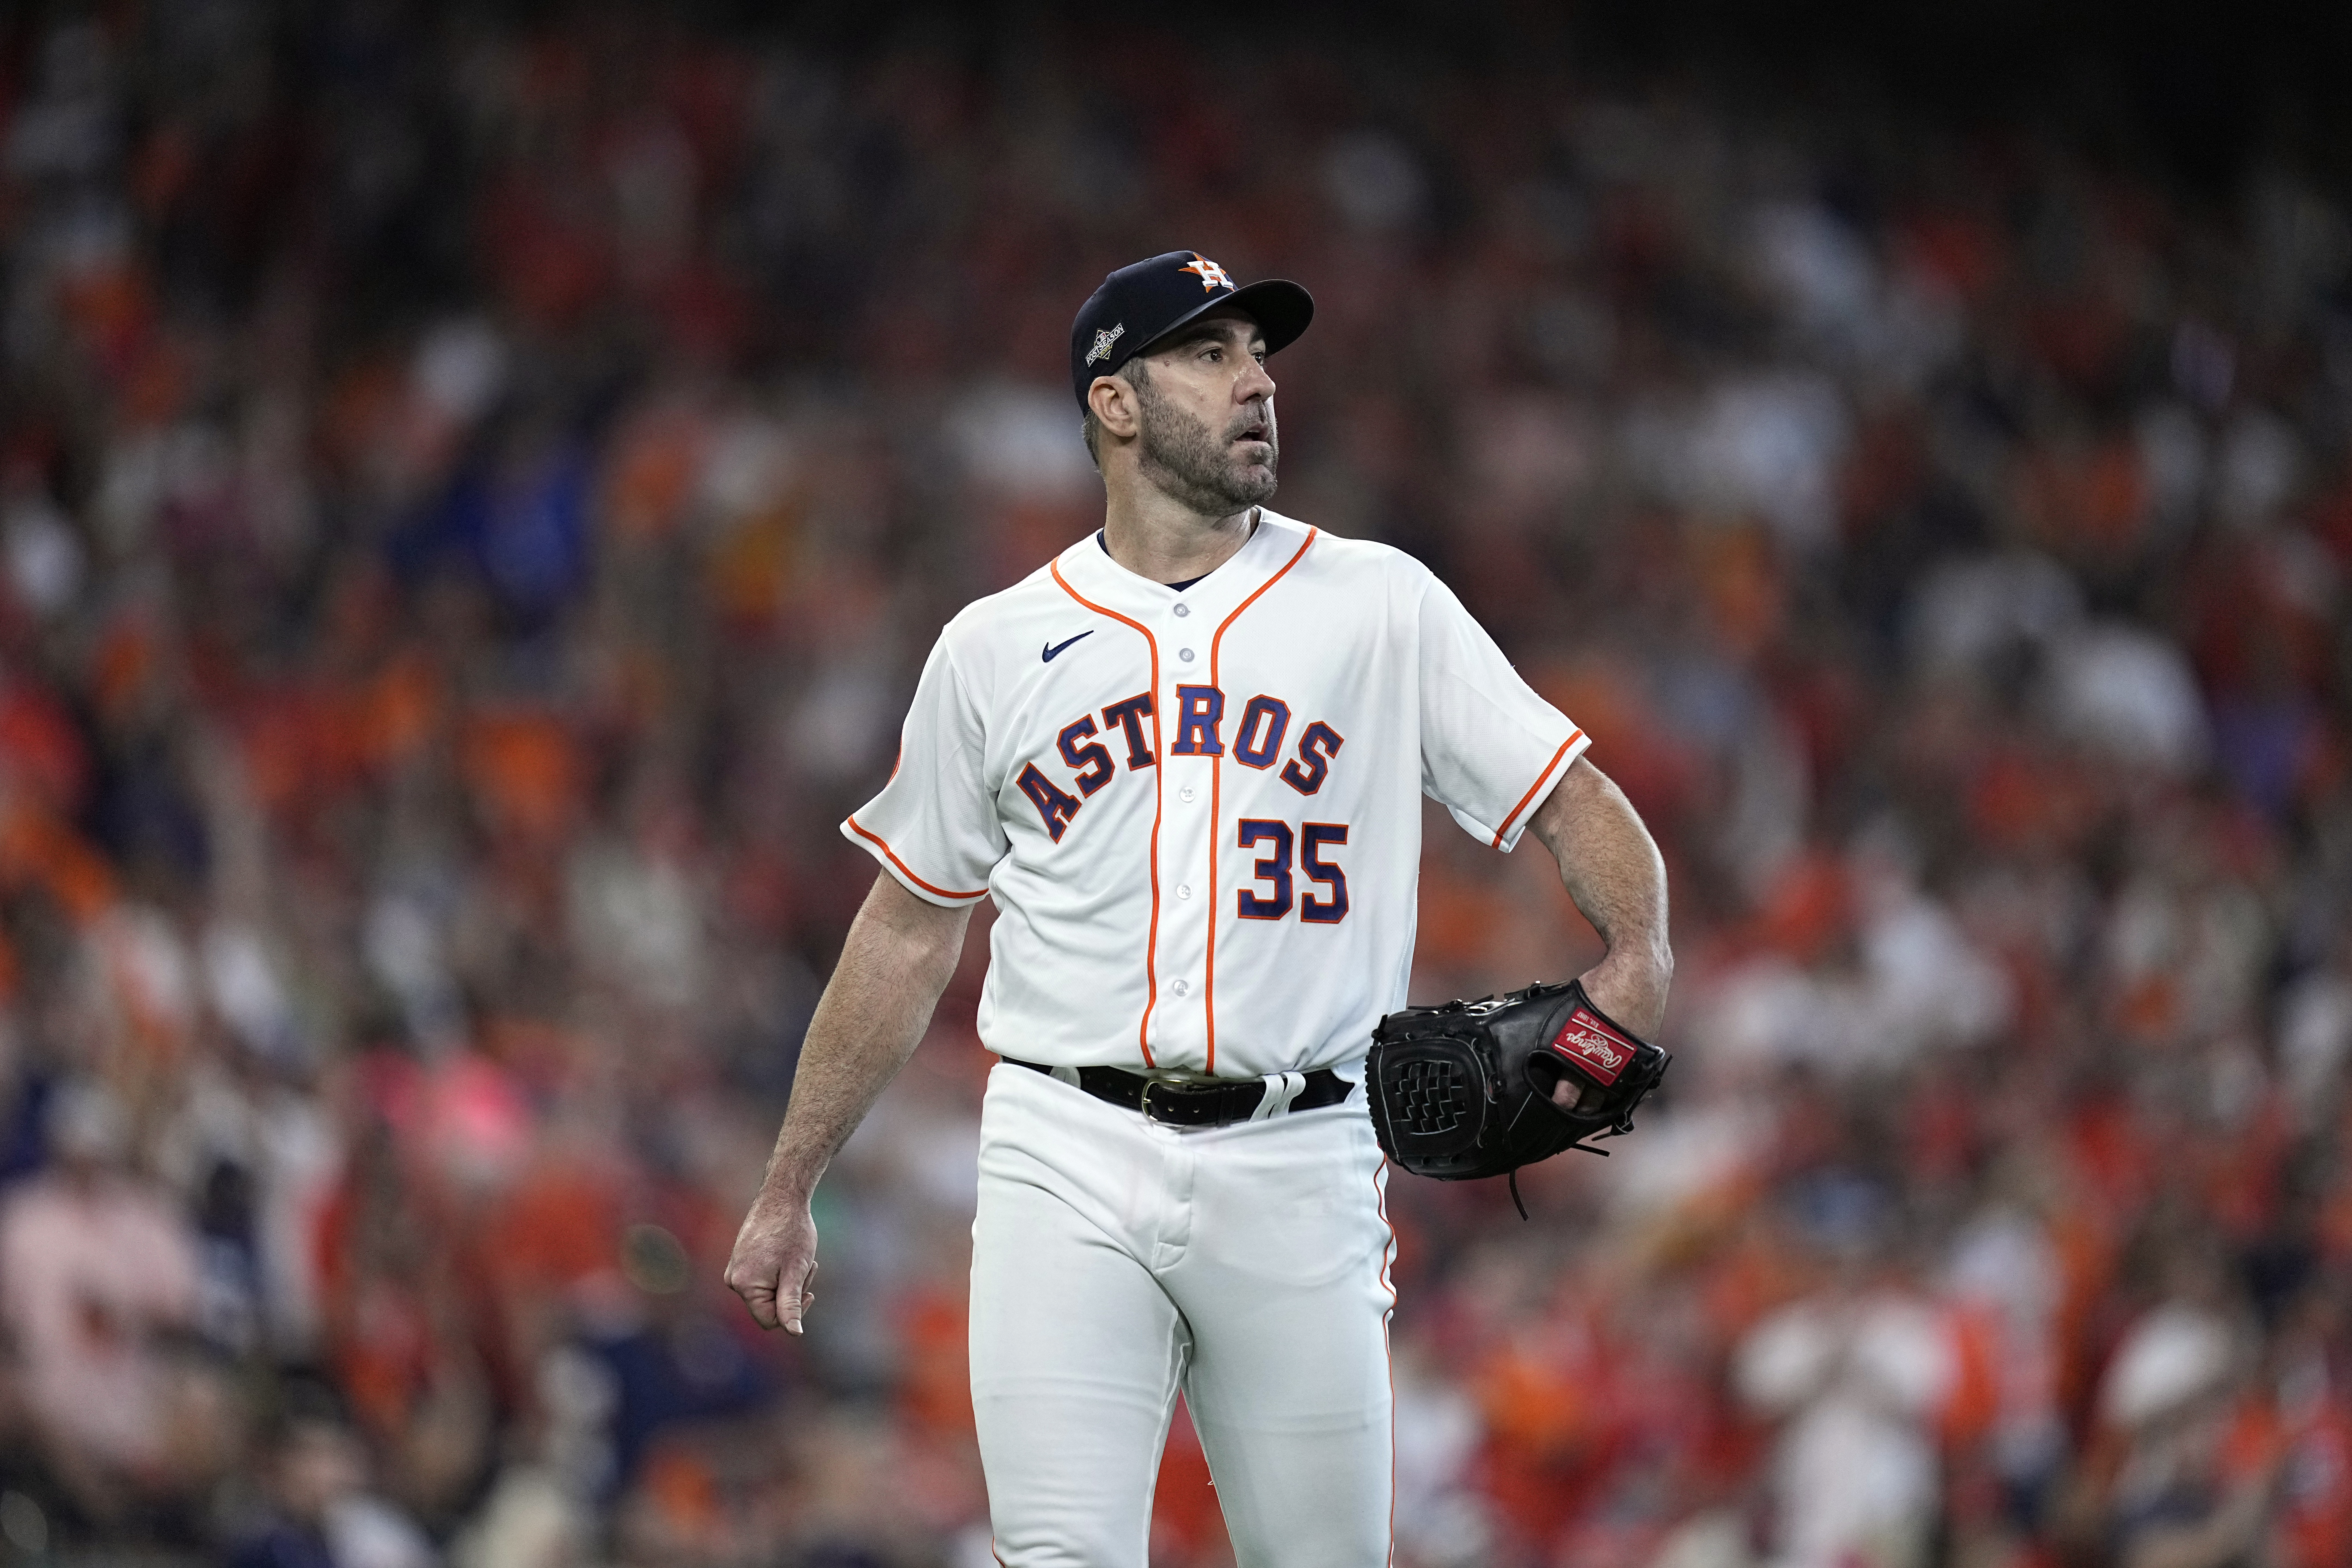 Astros ALCS watch parties: Catch the games at Minute Maid Park